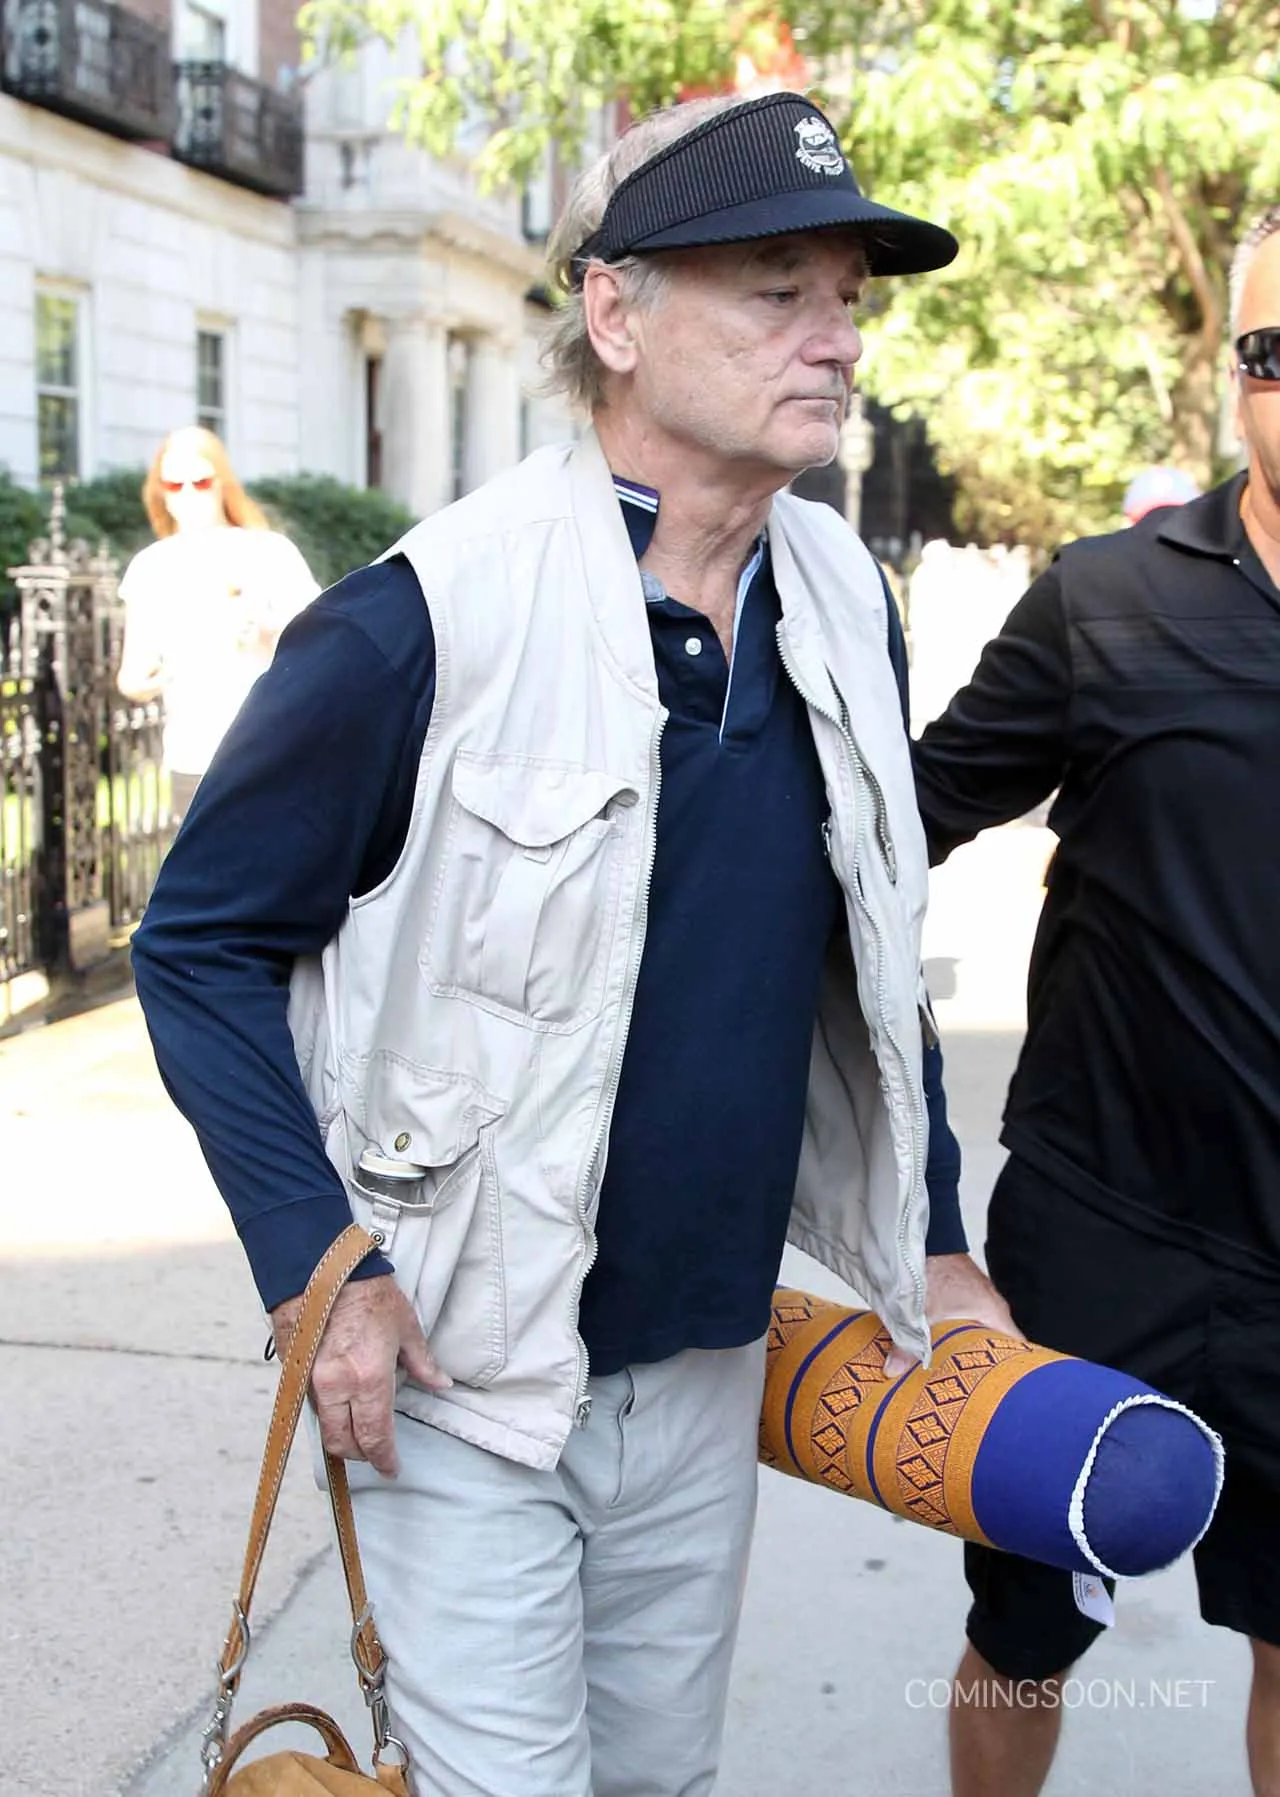 Bill Murray Heads to Ghostbusters Set